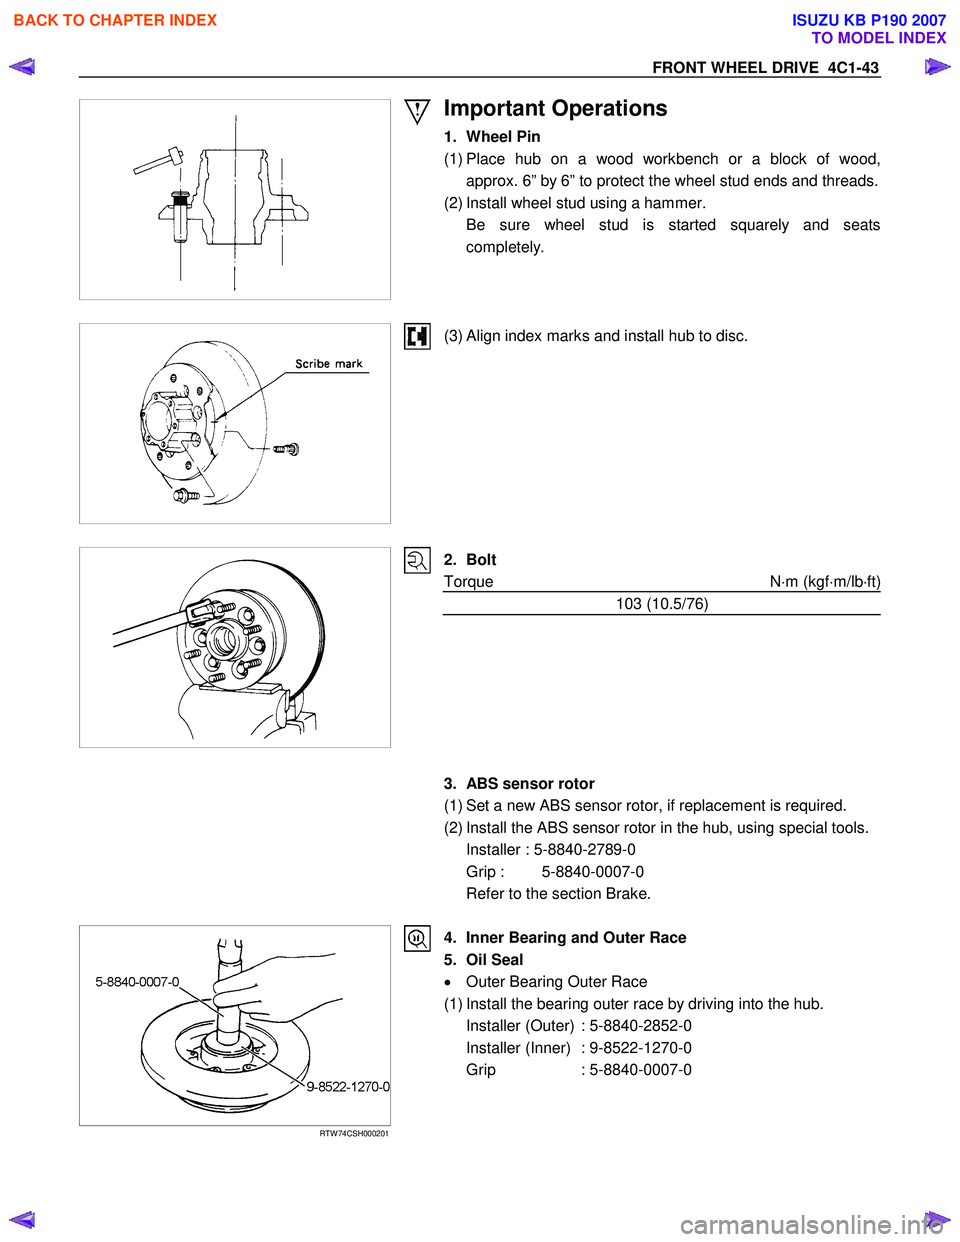 ISUZU KB P190 2007  Workshop Repair Manual FRONT WHEEL DRIVE  4C1-43 
 
 
Important Operations 
1. Wheel Pin  
(1) Place hub on a wood workbench or a block of wood, approx. 6” by 6” to protect the wheel stud ends and threads.
(2) Install w